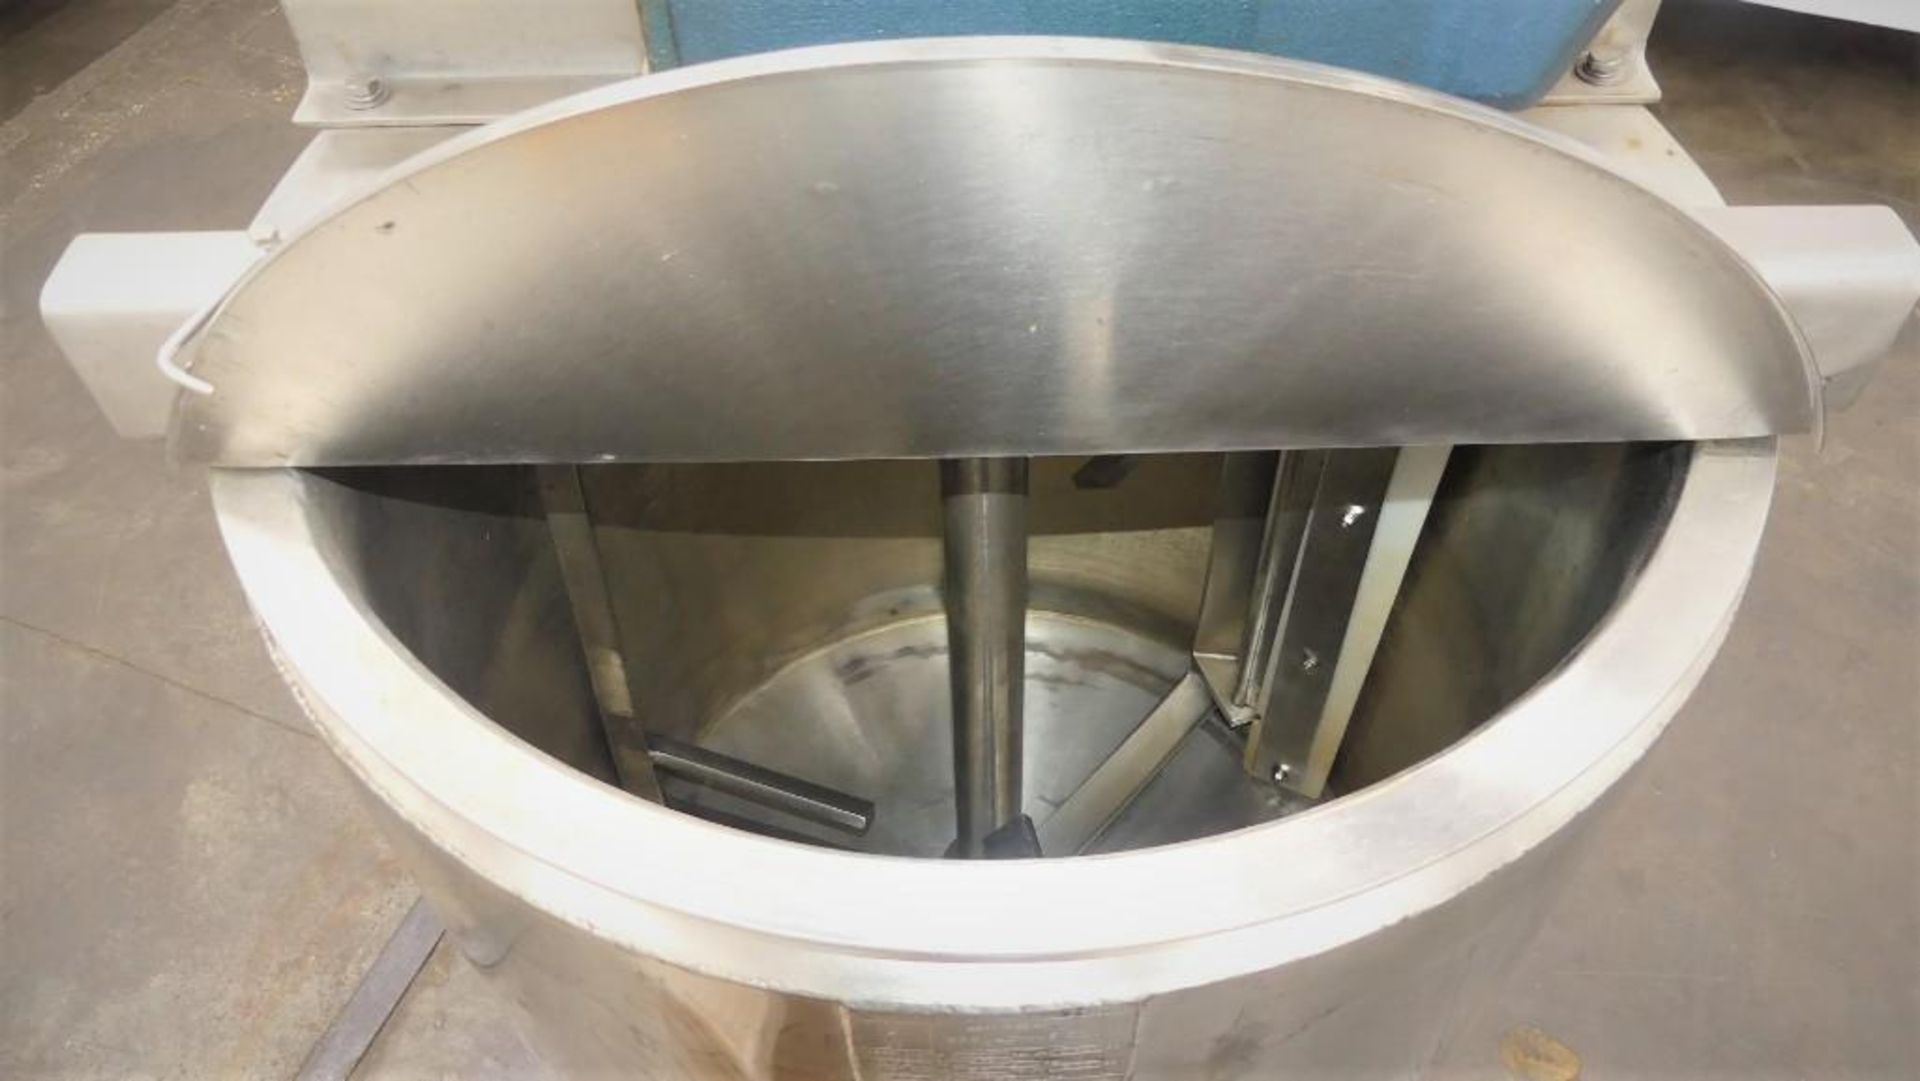 B&G Machine Company 100 Gallon Stainless Steel Jacketed Mixing Tank - Image 15 of 23